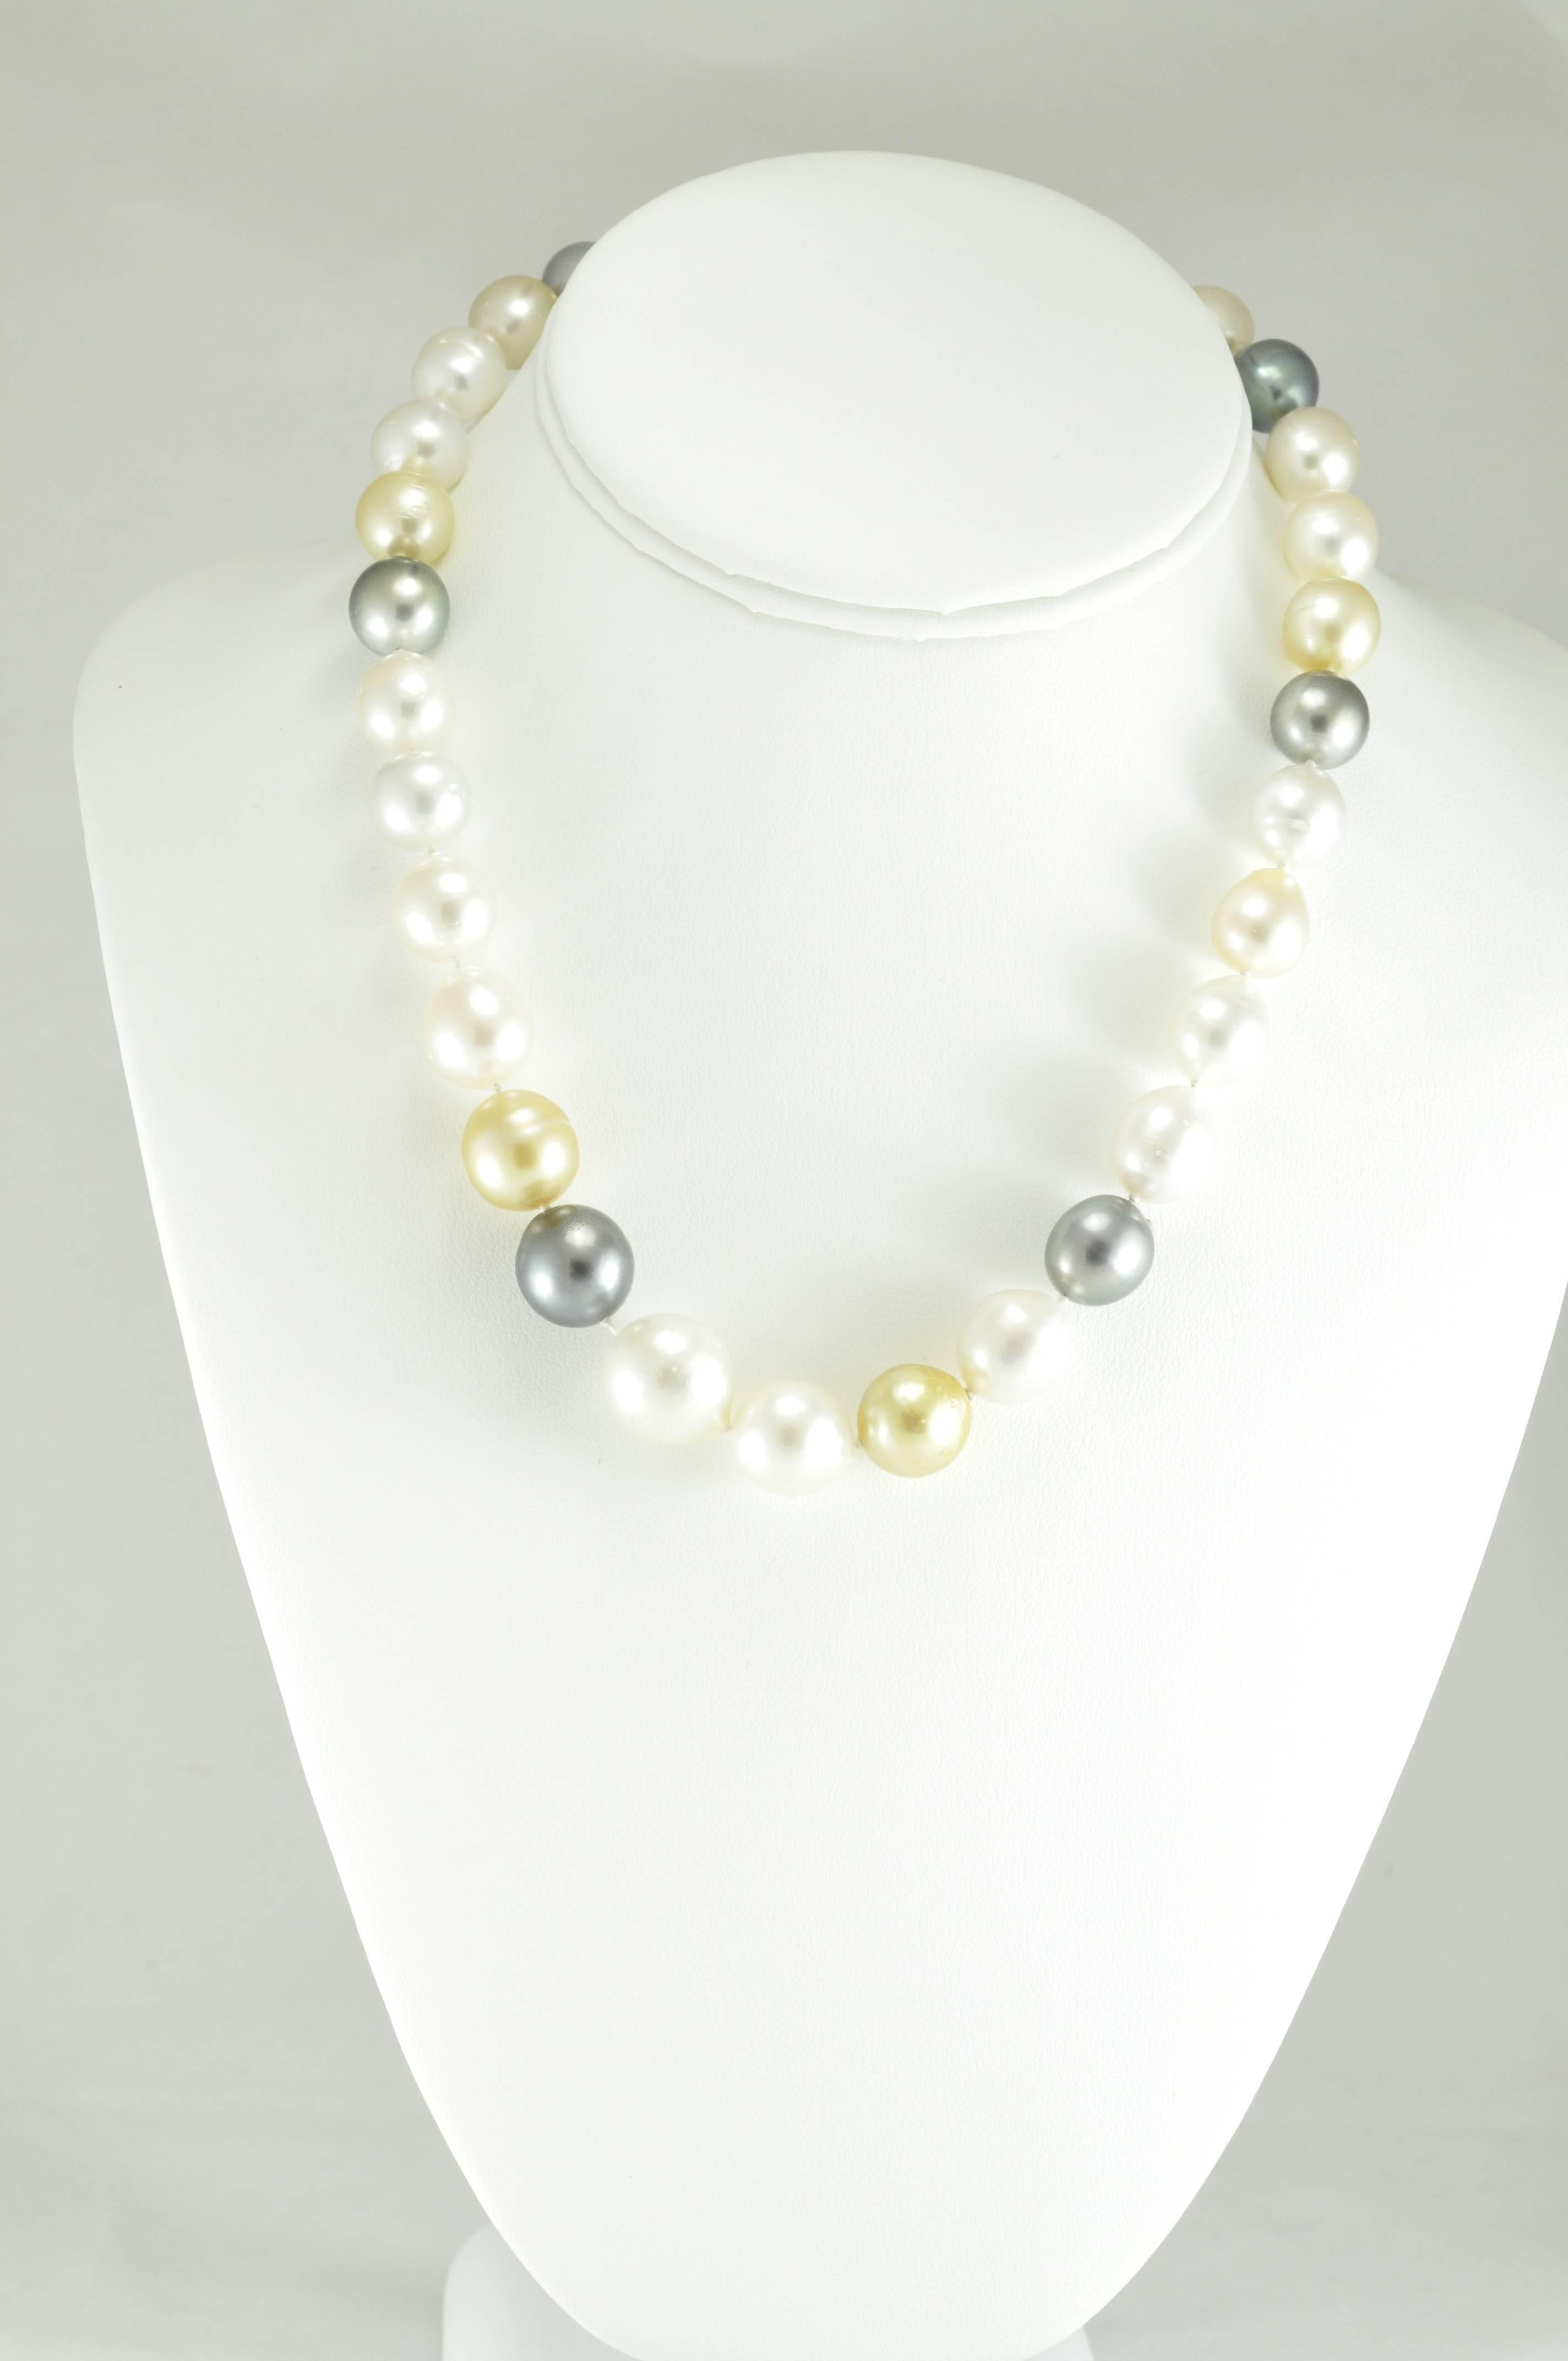 Elegant and versatile 14k White Gold and Multi-colored South Sea and Tahitian Pearls 11-15mm.  18 inches long with a 14k clasp. Great for casual and formal occasions. 